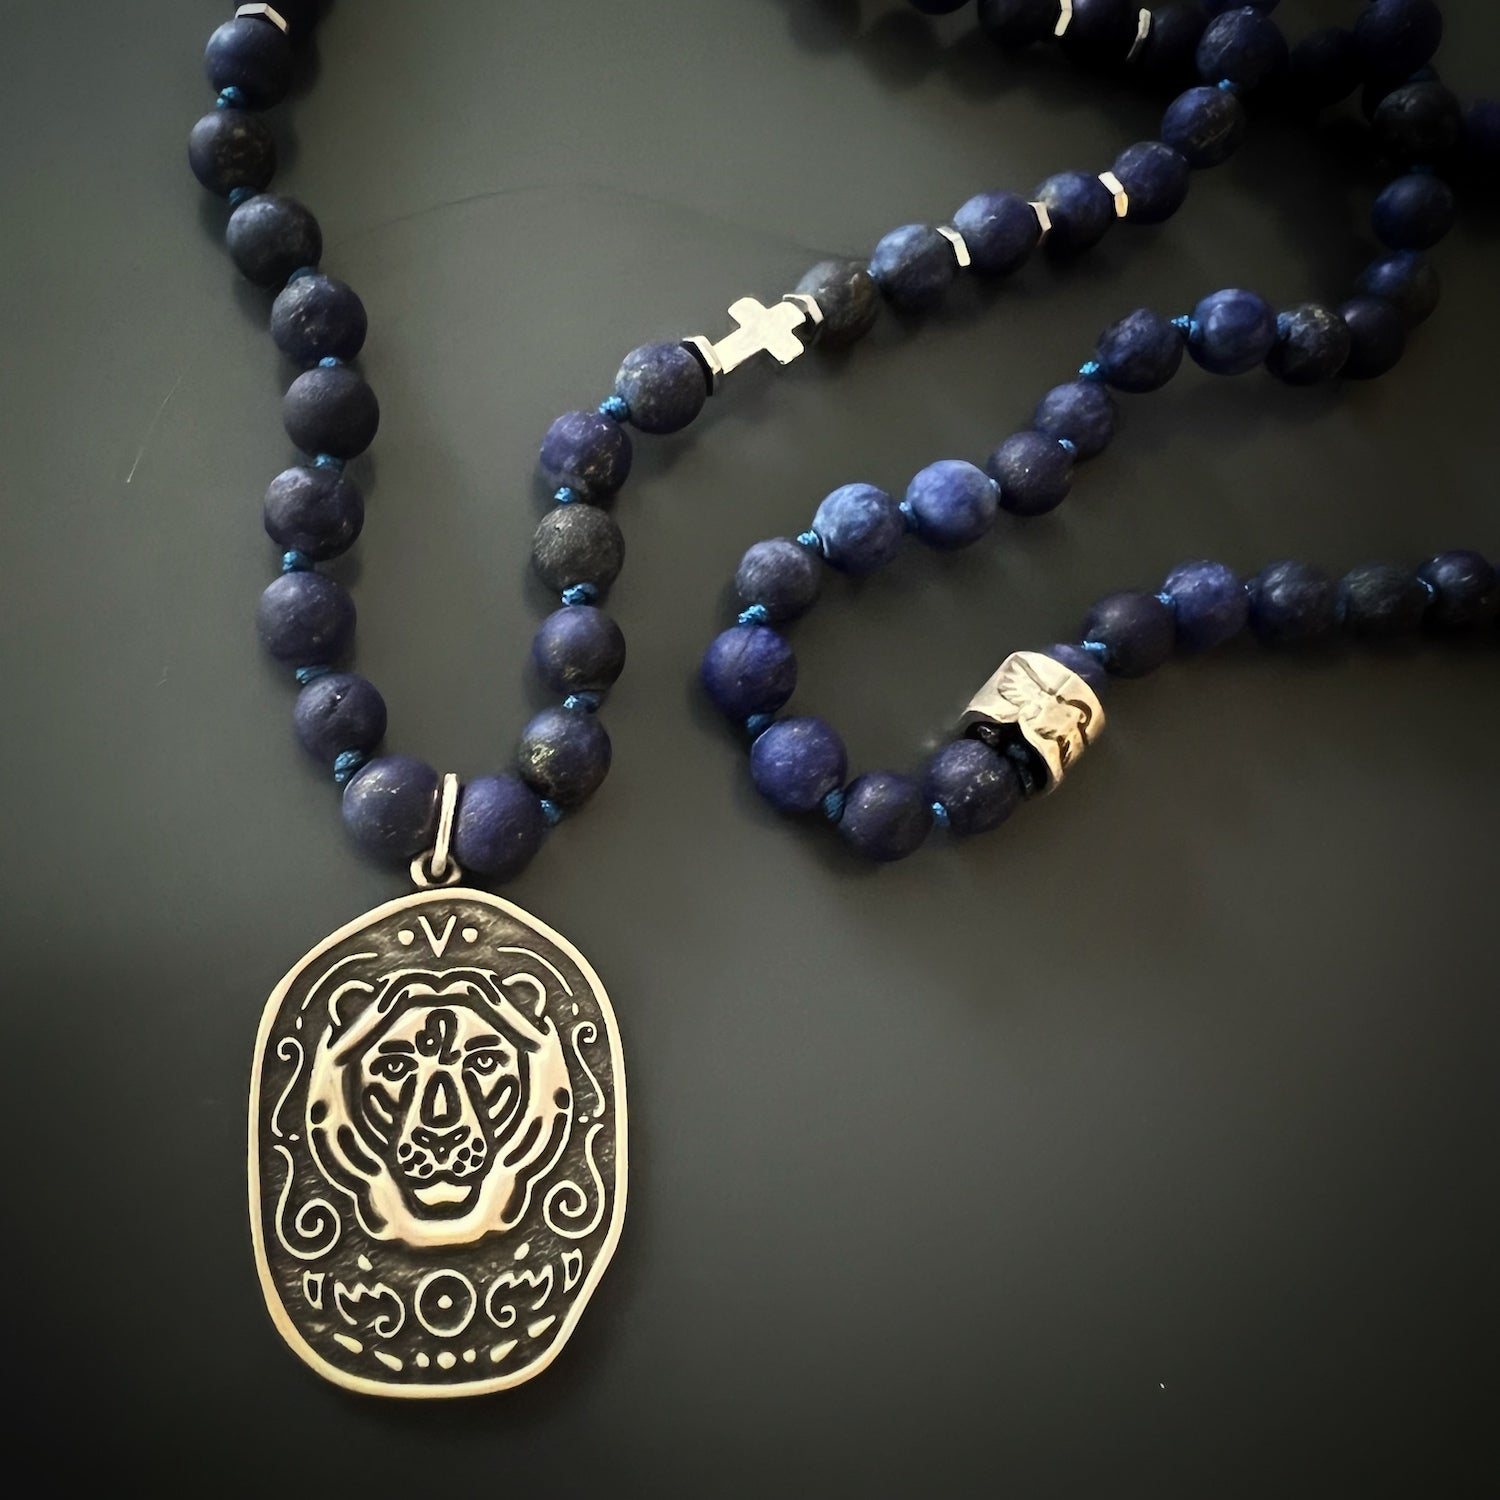 The Spiritual Lapis Lazuli Lion necklace reflects the artistry and meaning behind handmade jewelry, creating a truly special accessory.